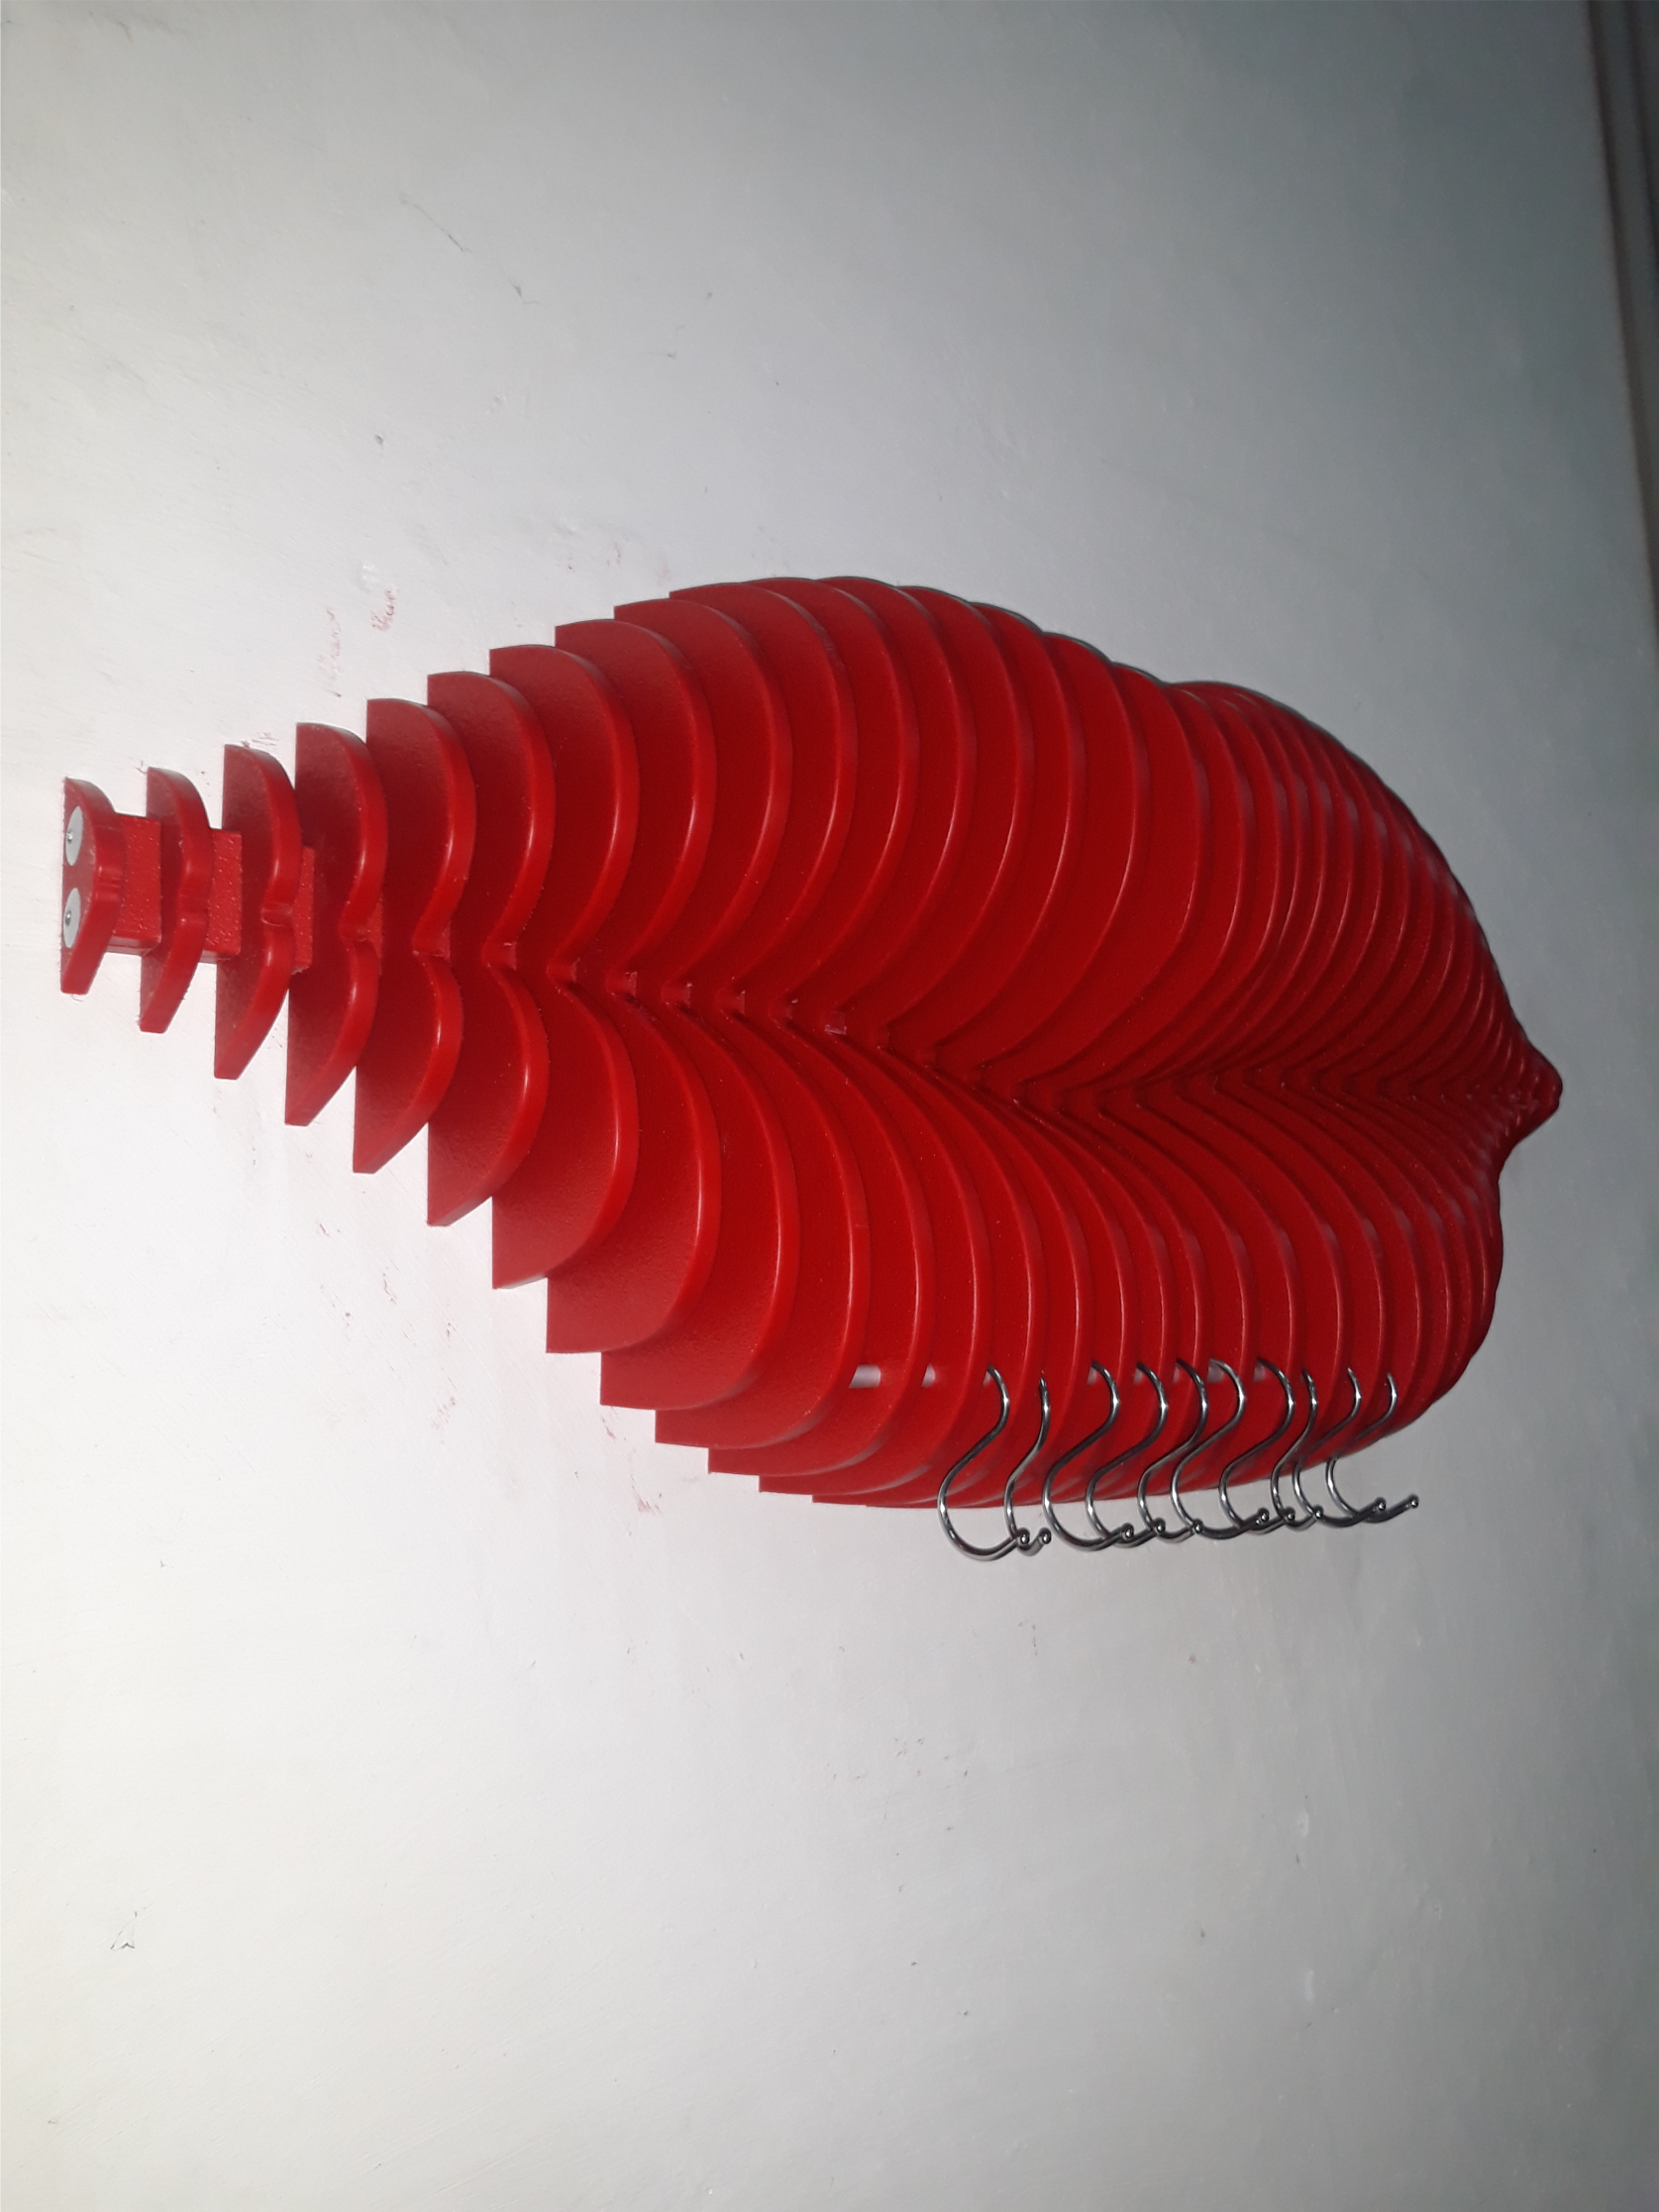 Interior Decorations - 3d Wave Panels and parametric products - www.wallwithwaves.com